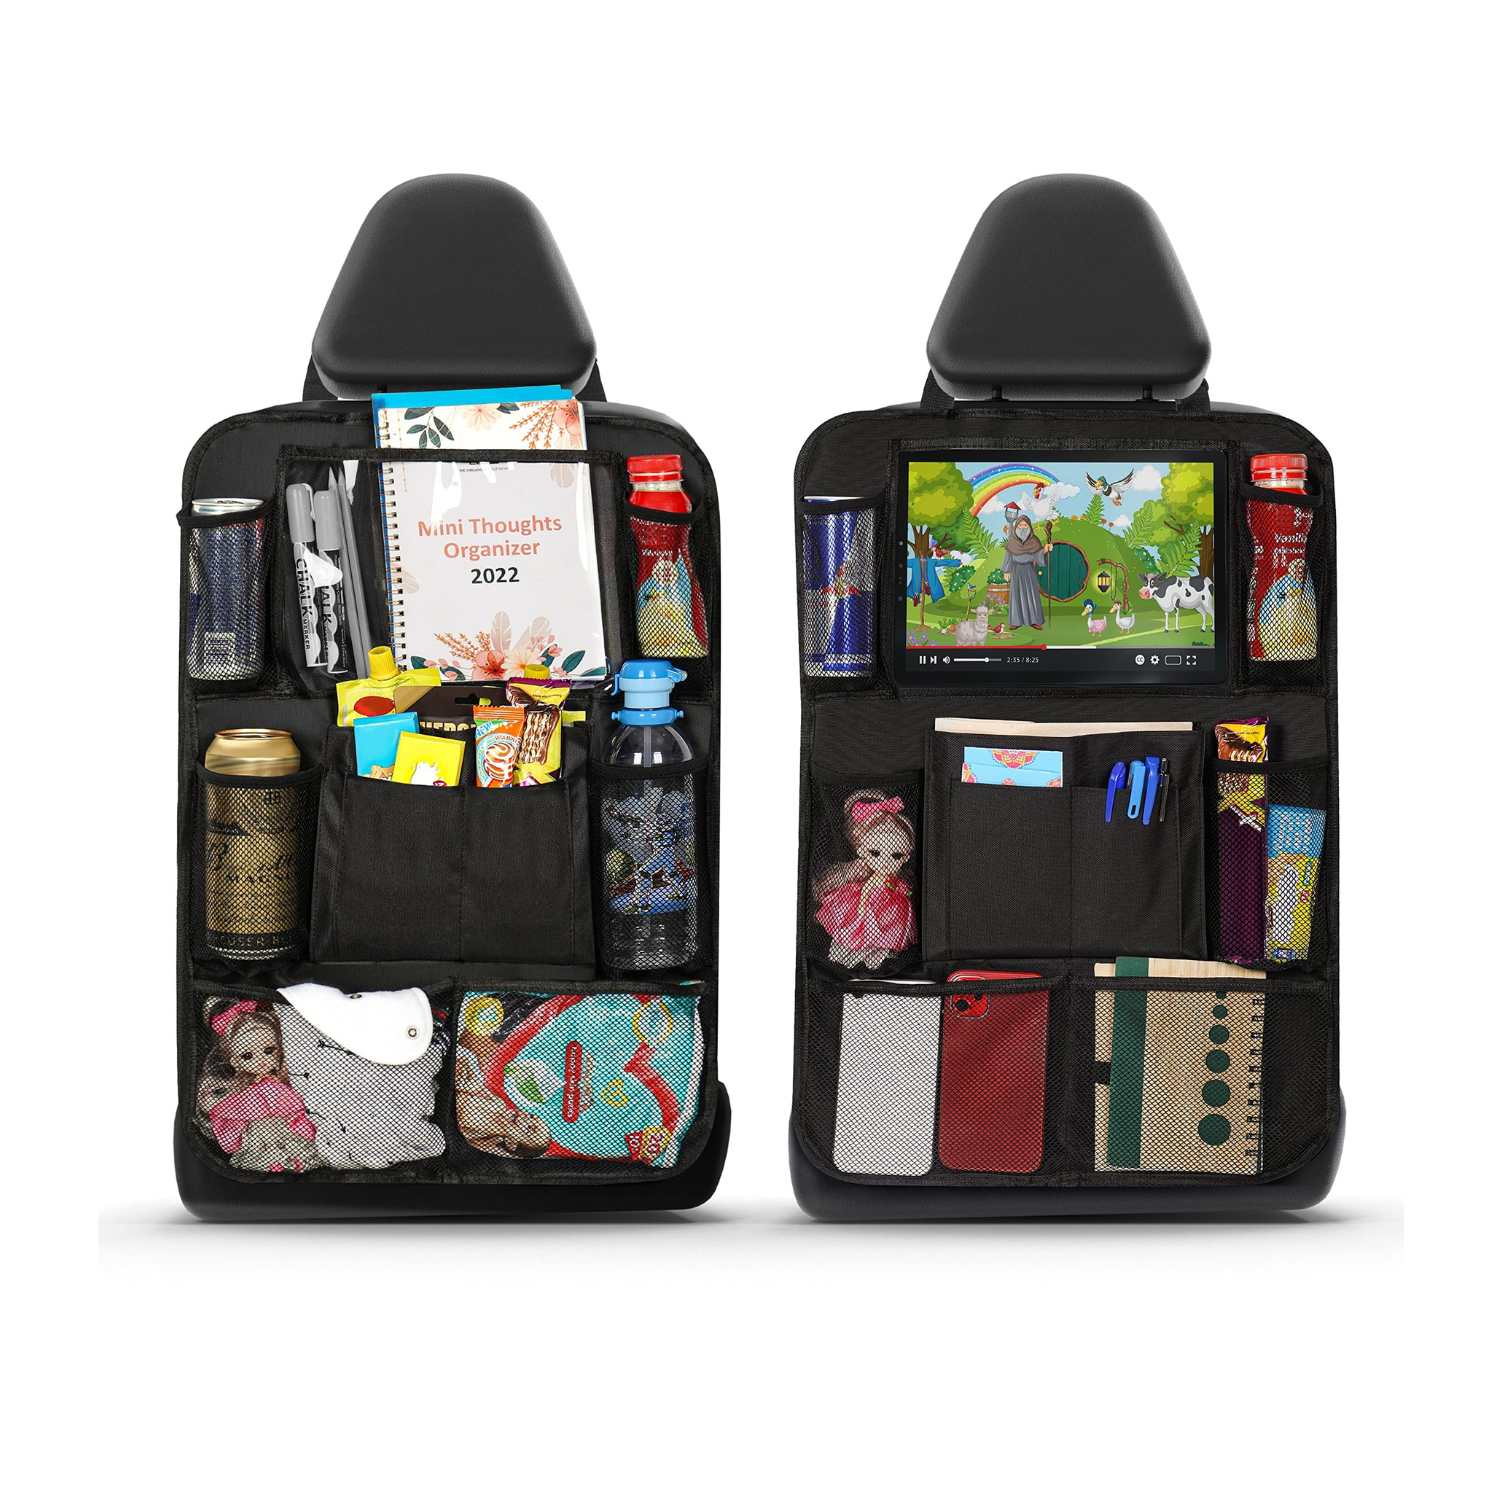 Car Gadget Organizer Review: Keep Your Vehicle Neat and Tidy